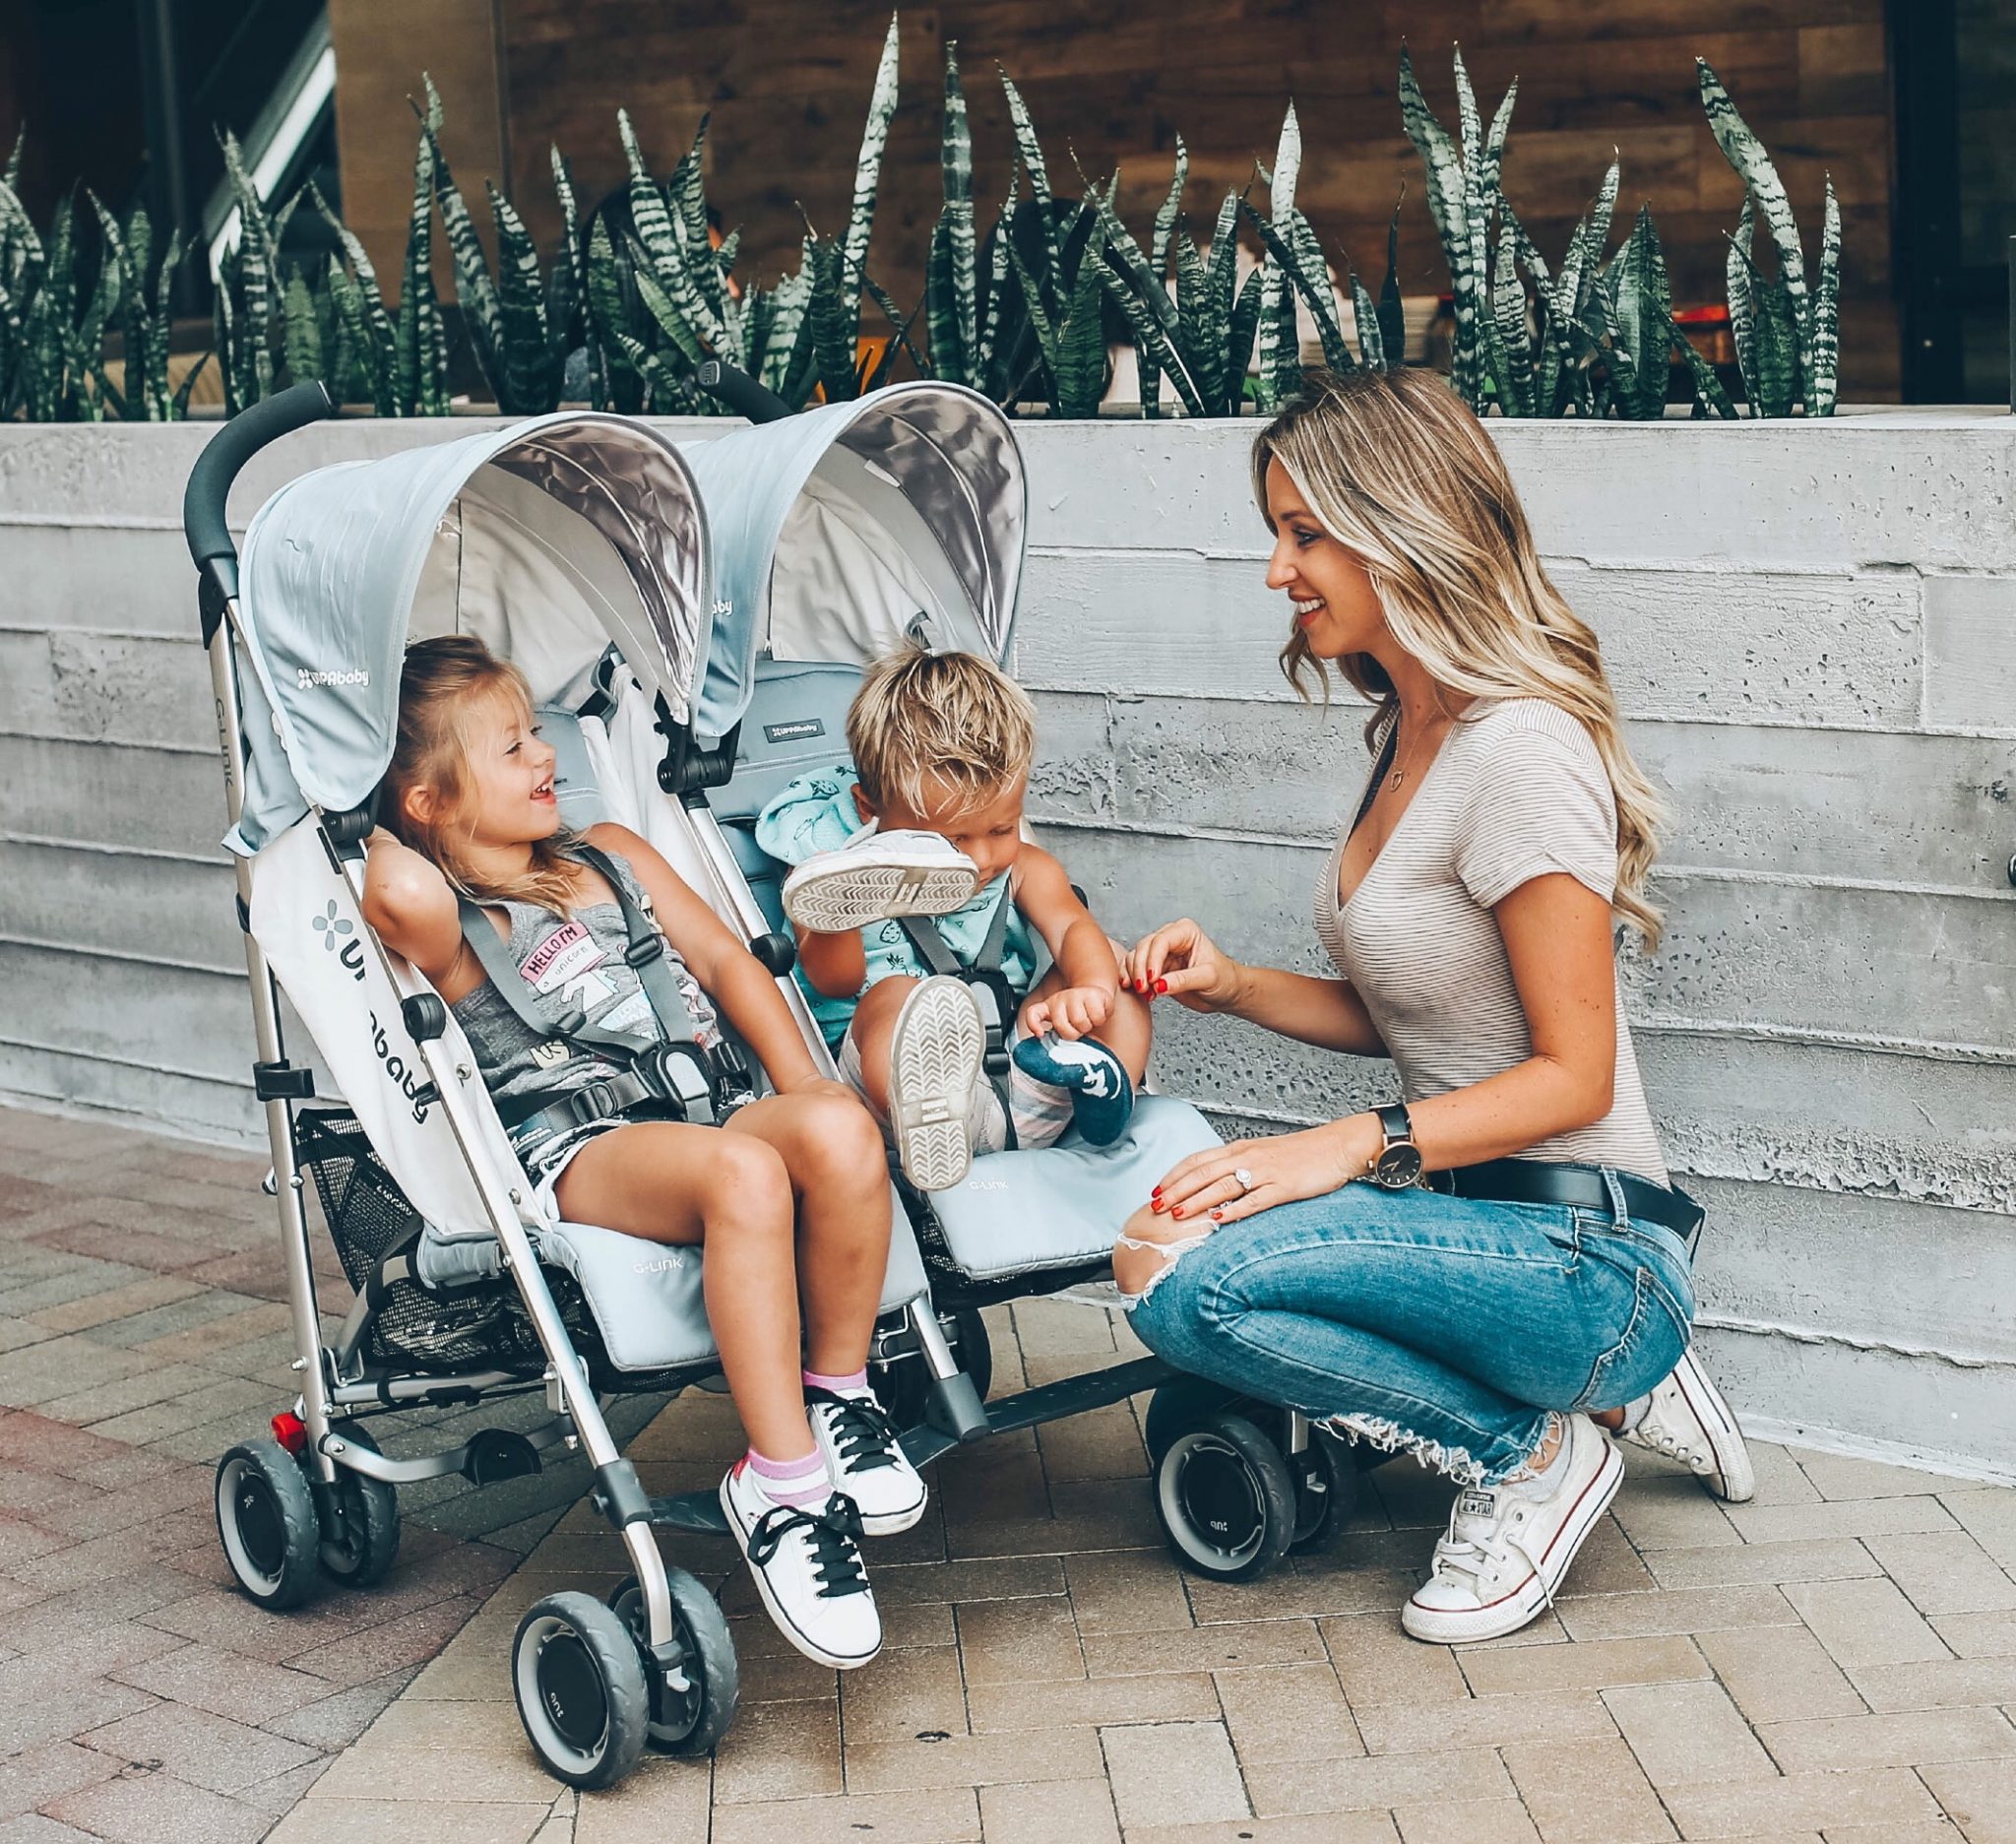 uppababy glink 2 release date